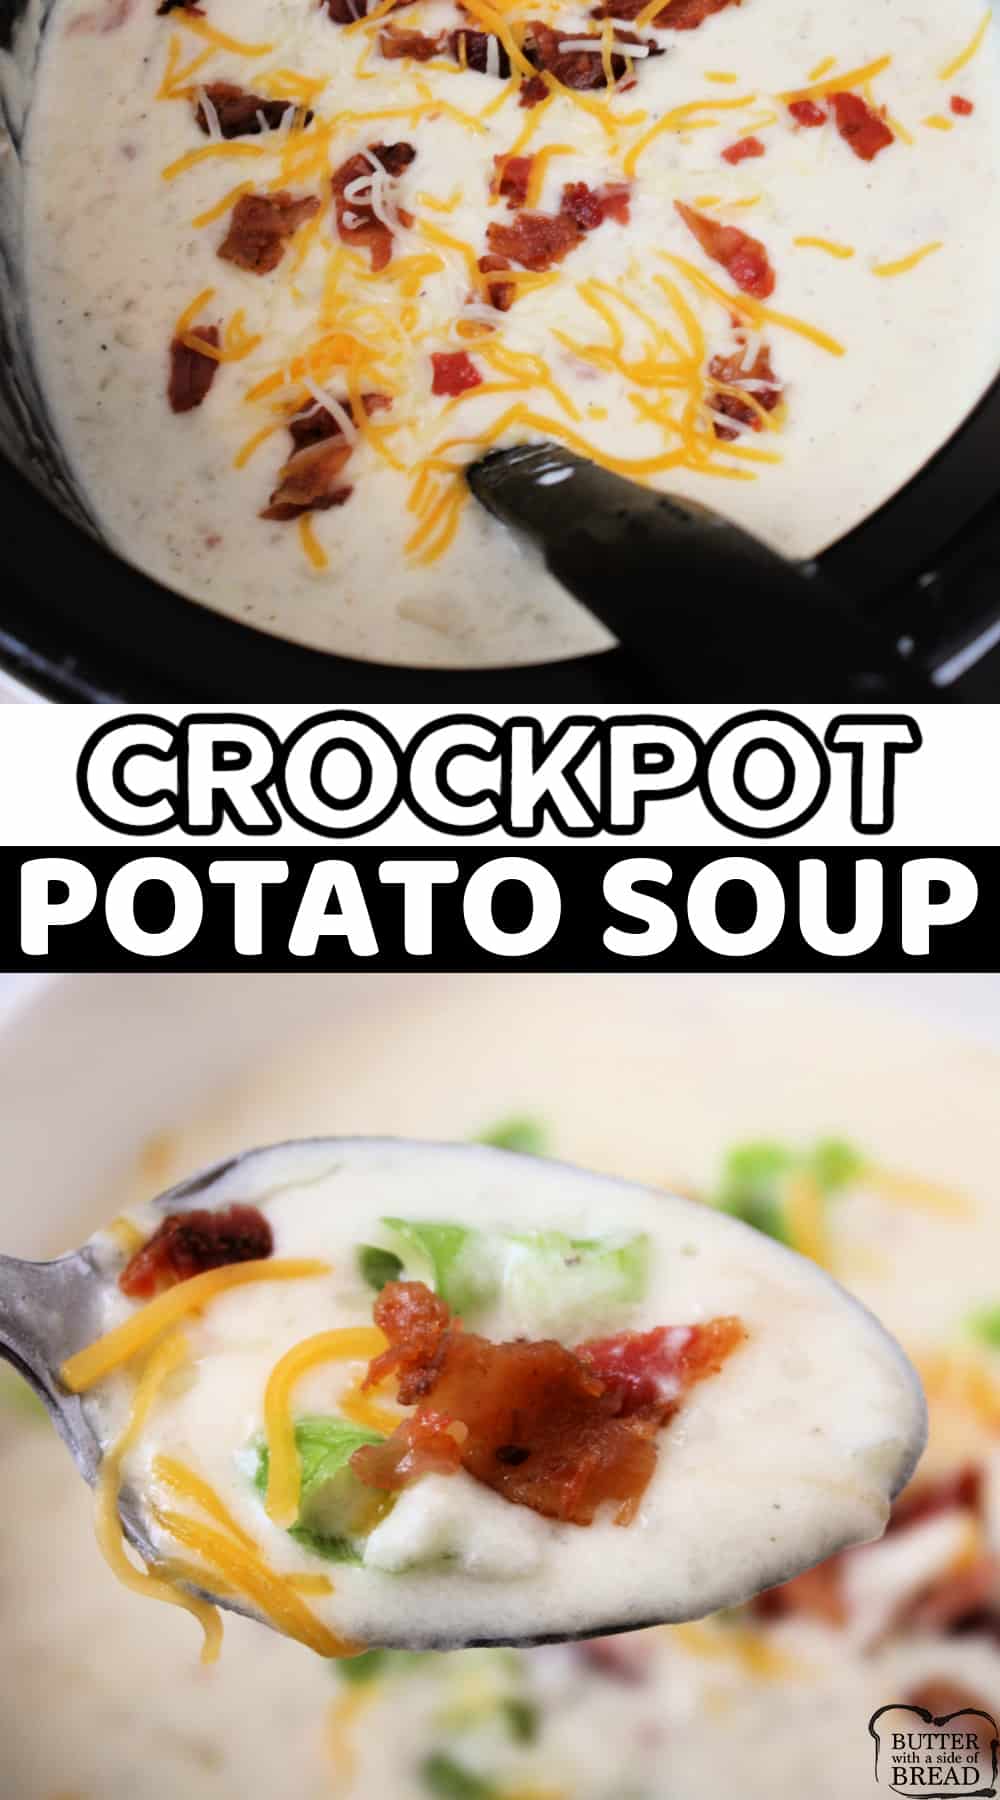 Crockpot Potato Soup is rich, creamy, cheesy and perfect for a chilly day. Delicious slow cooker potato soup recipe that is simple to make! 